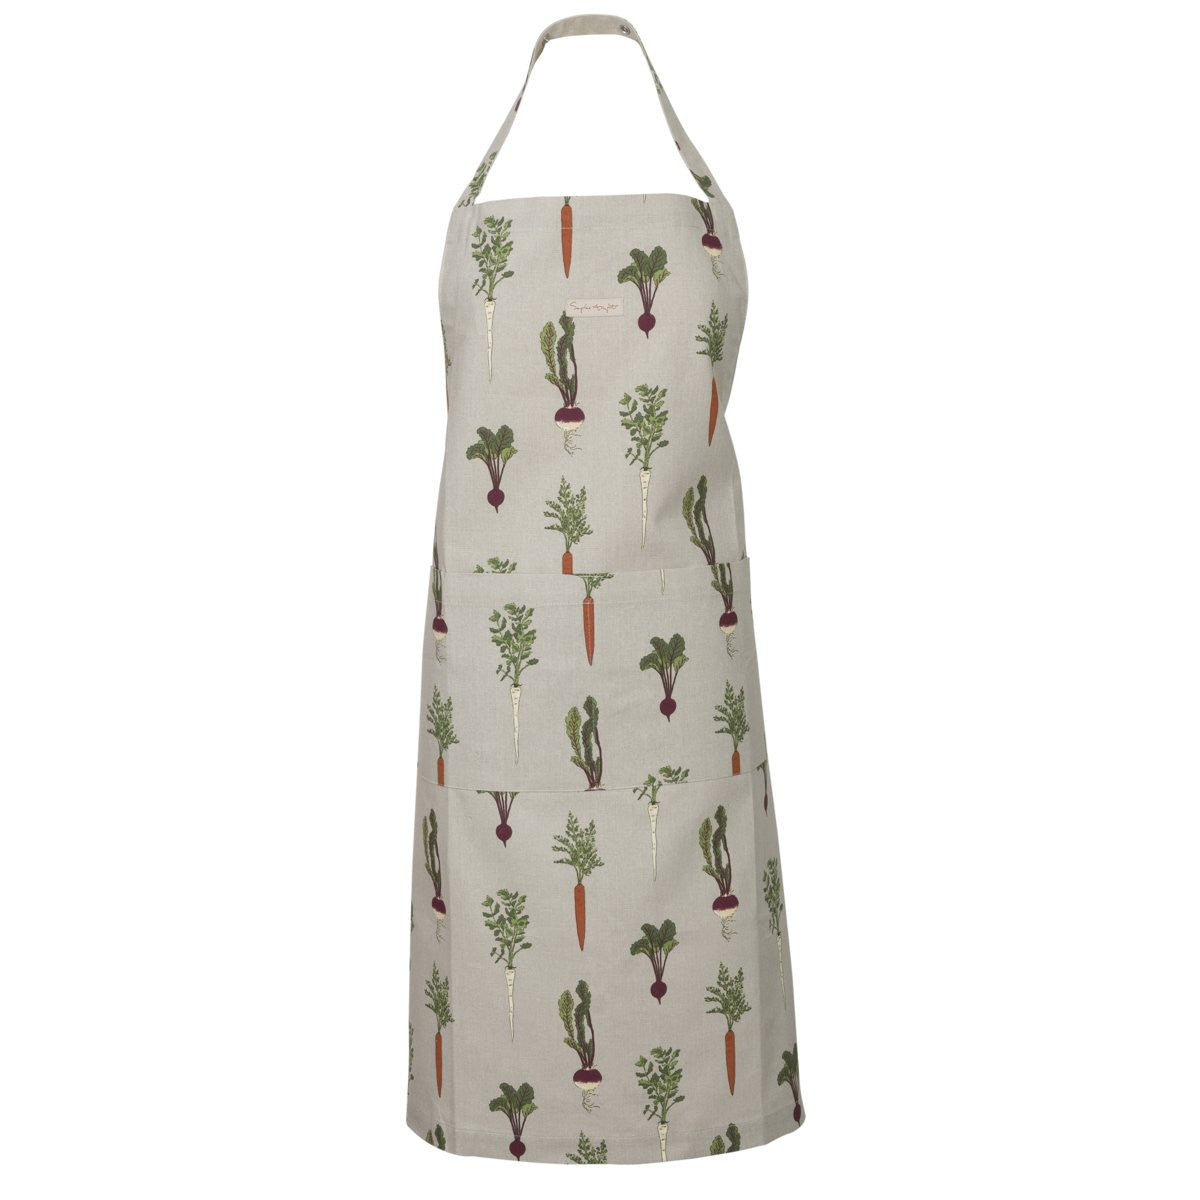 Home Grown Adult Apron from Sophie Allport